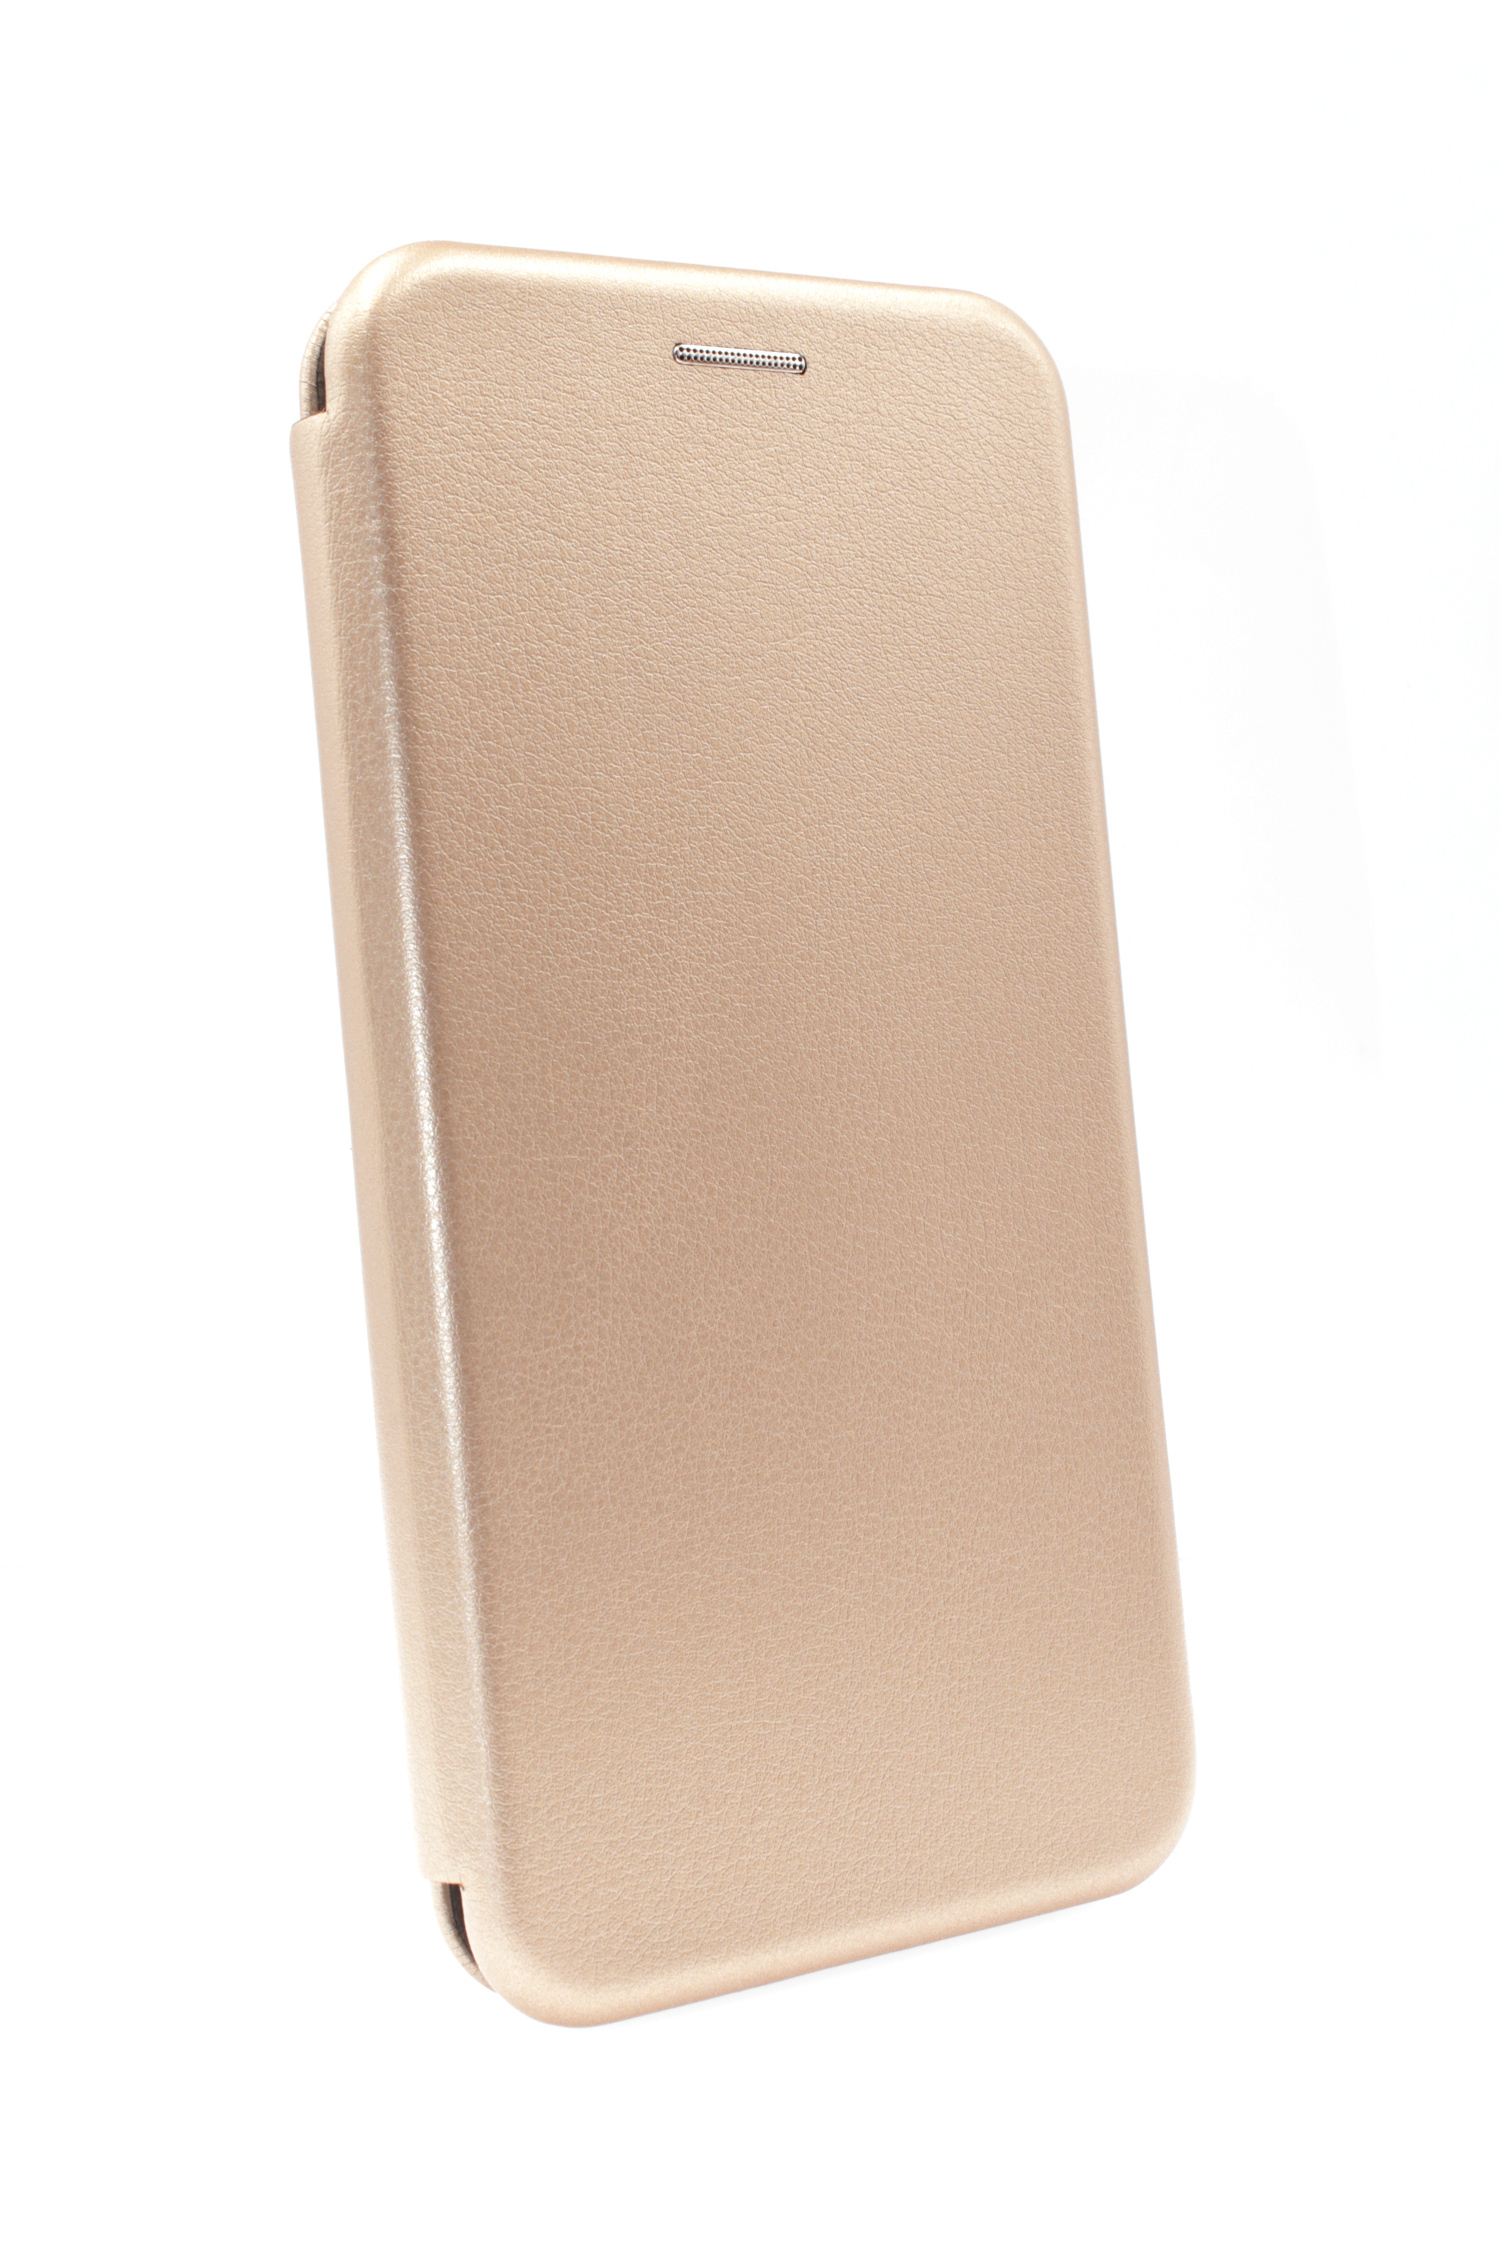 JAMCOVER Bookcase Gold Apple, Rounded, Pro, 11 Bookcover, iPhone